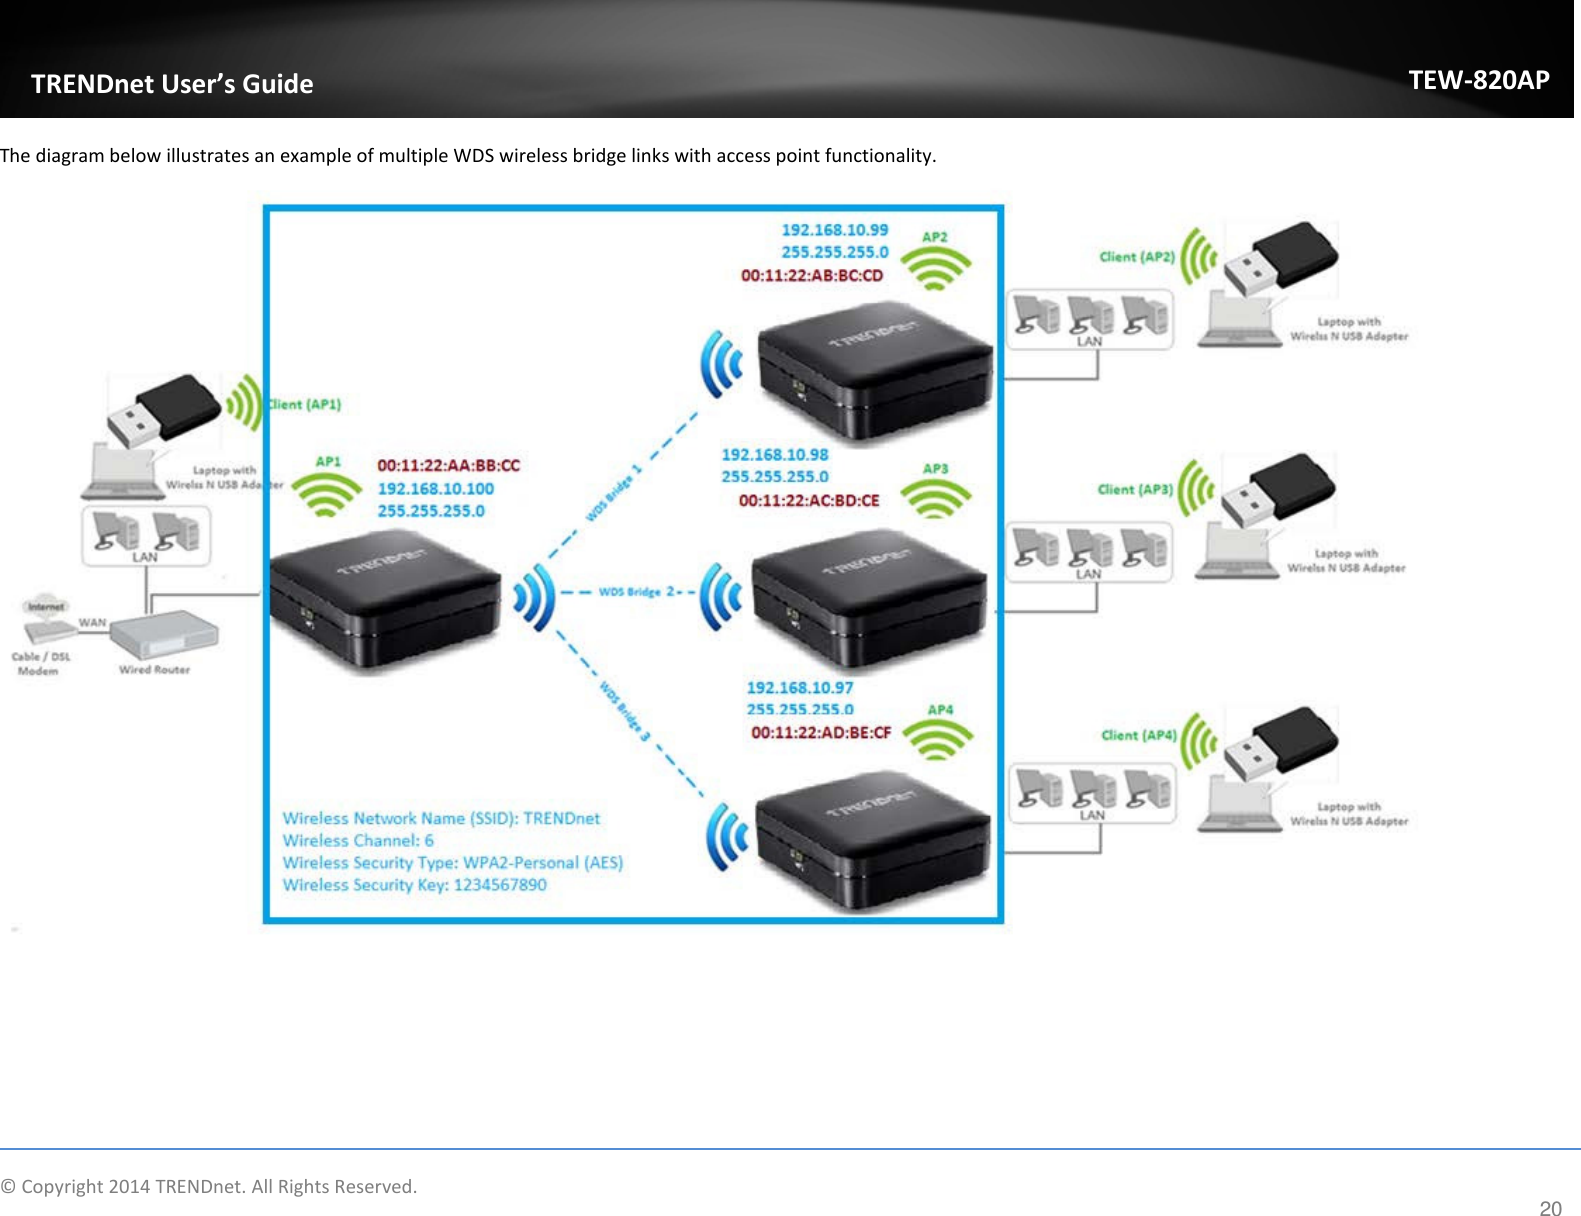             TRENDnet User’s Guide TEW-820AP The diagram below illustrates an example of multiple WDS wireless bridge links with access point functionality.       © Copyright 2014 TRENDnet. All Rights Reserved.      20 